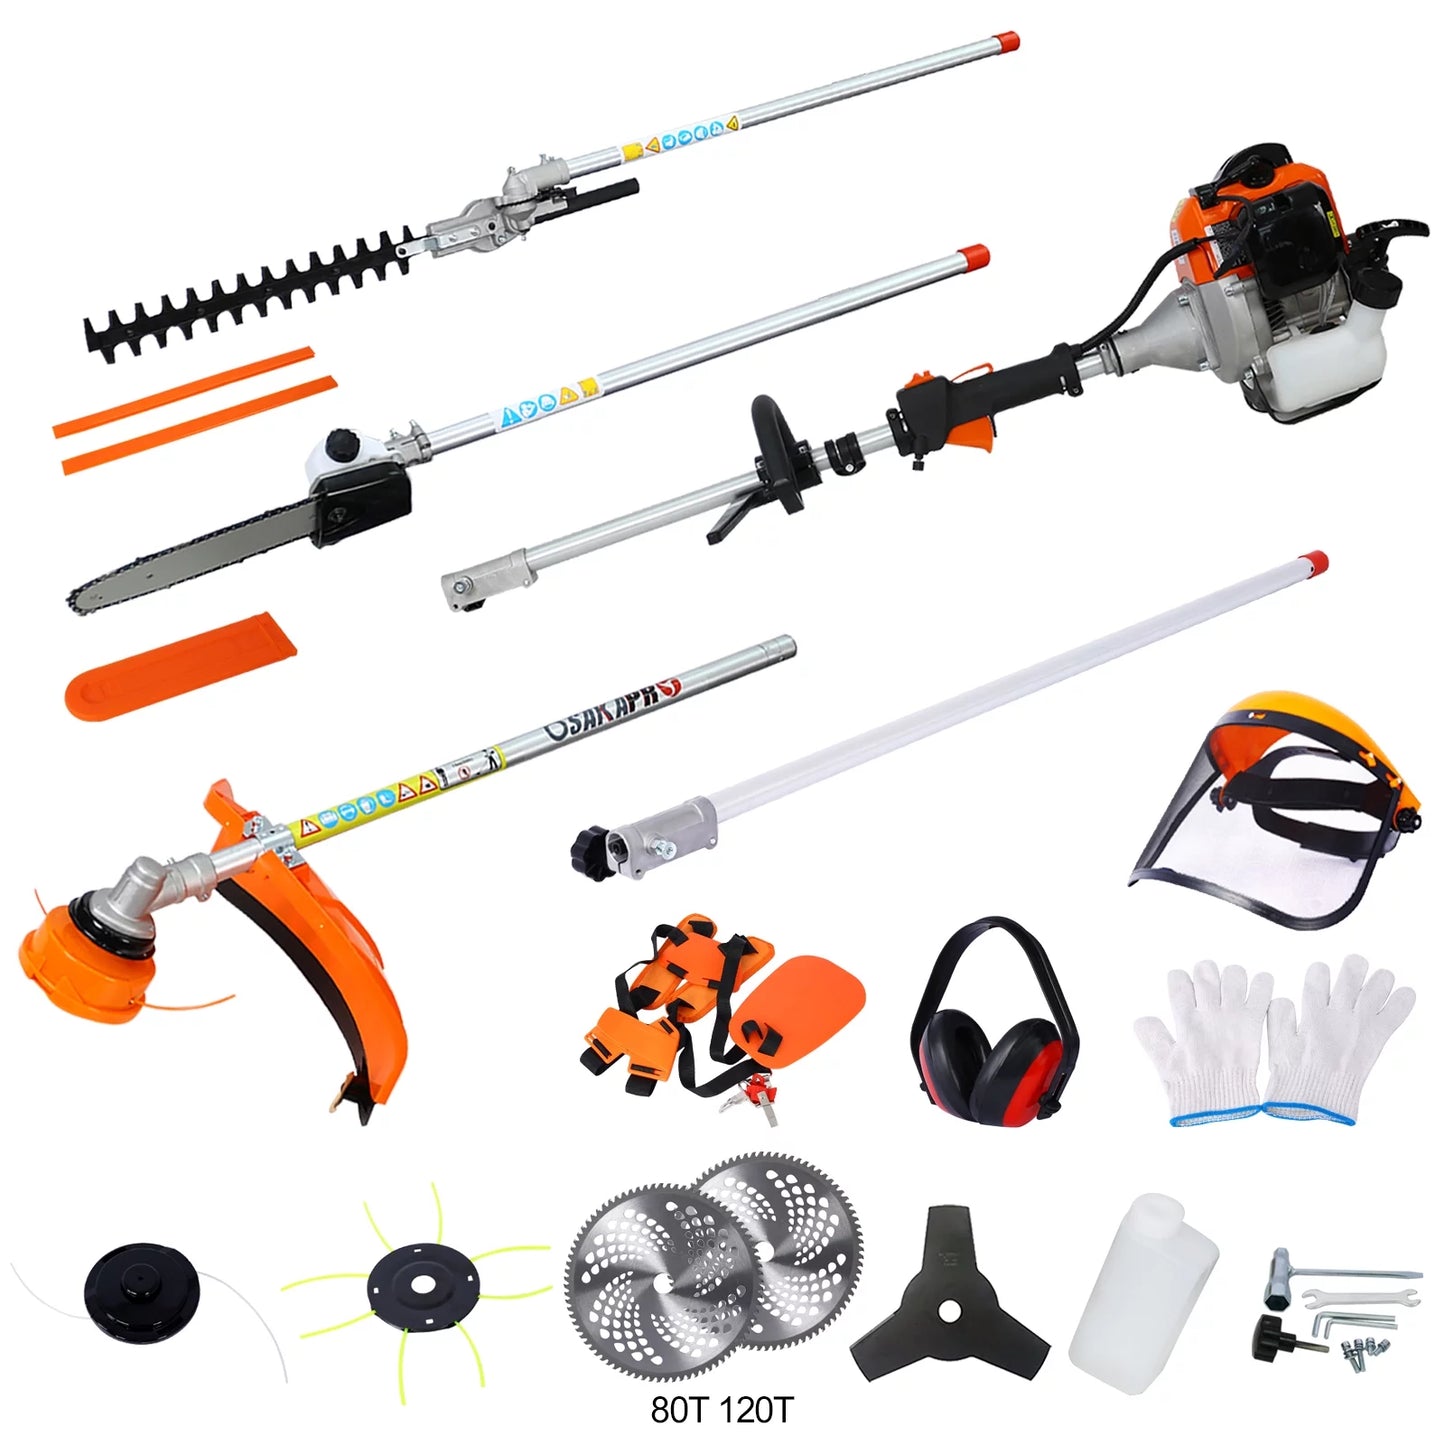 12 in 1 Multi-Functional Trimming Tool, 52CC 2-Cycle Garden Tool System with Gas Pole Saw, Hedge Trimmer, Grass Trimmer, and Brush Cutter EPA Compliant